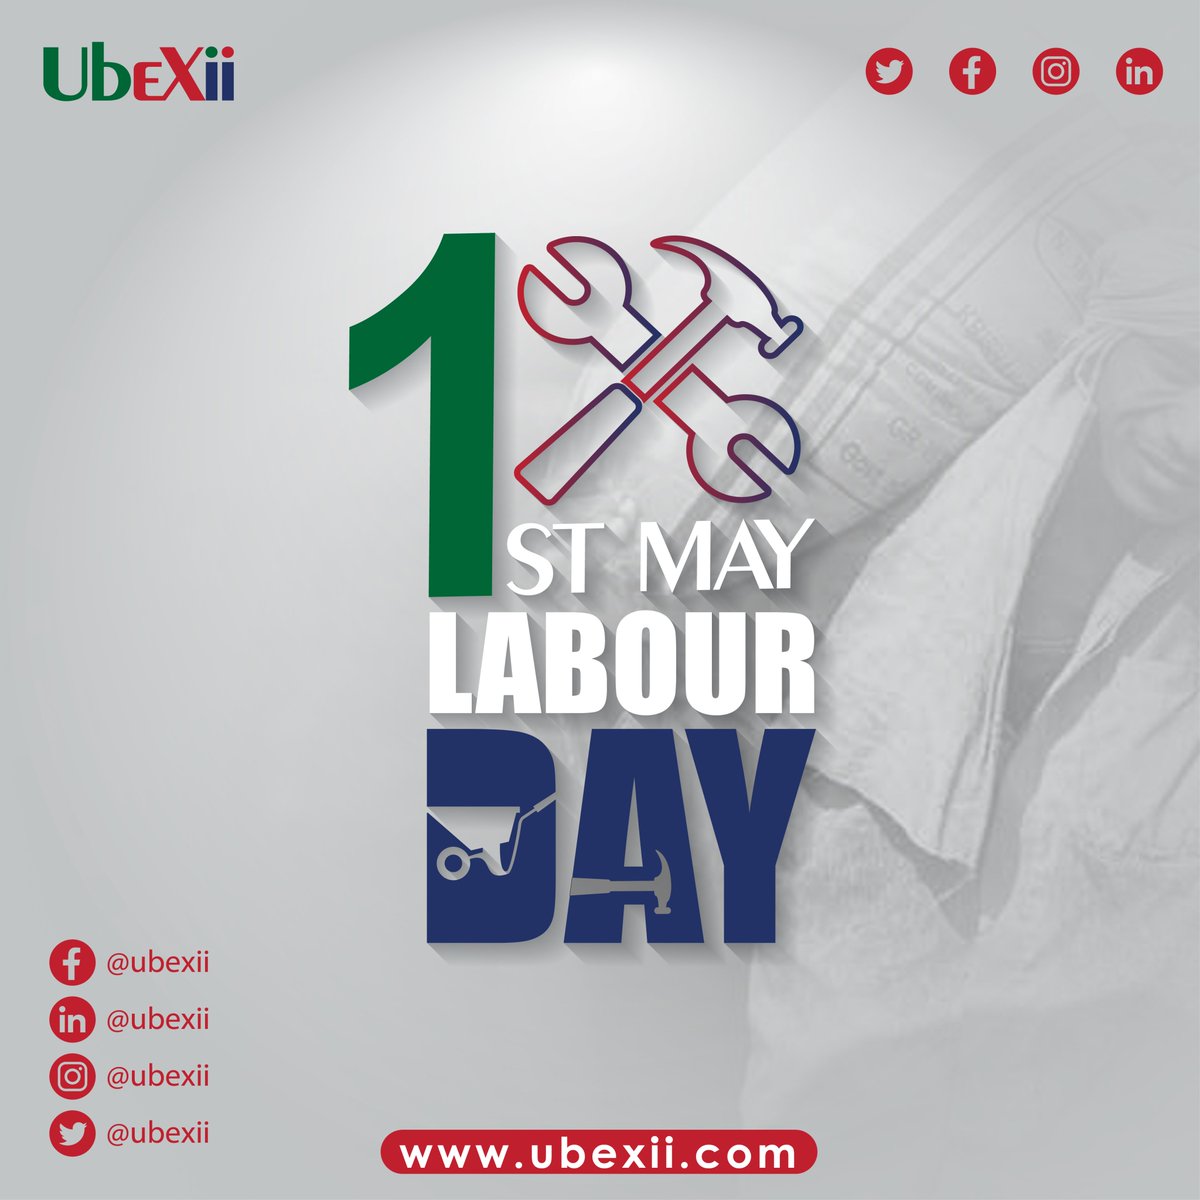 Let us thank all the hardworking laborers around the world for their dedication. Their work is essential for the functioning of our society. 

#laborday #labordayweekend #pharmacy #weekend #holiday #may #workers #HappyLaborDay #OurWorkforce #HardWorkers #Pakistan #labourday2023